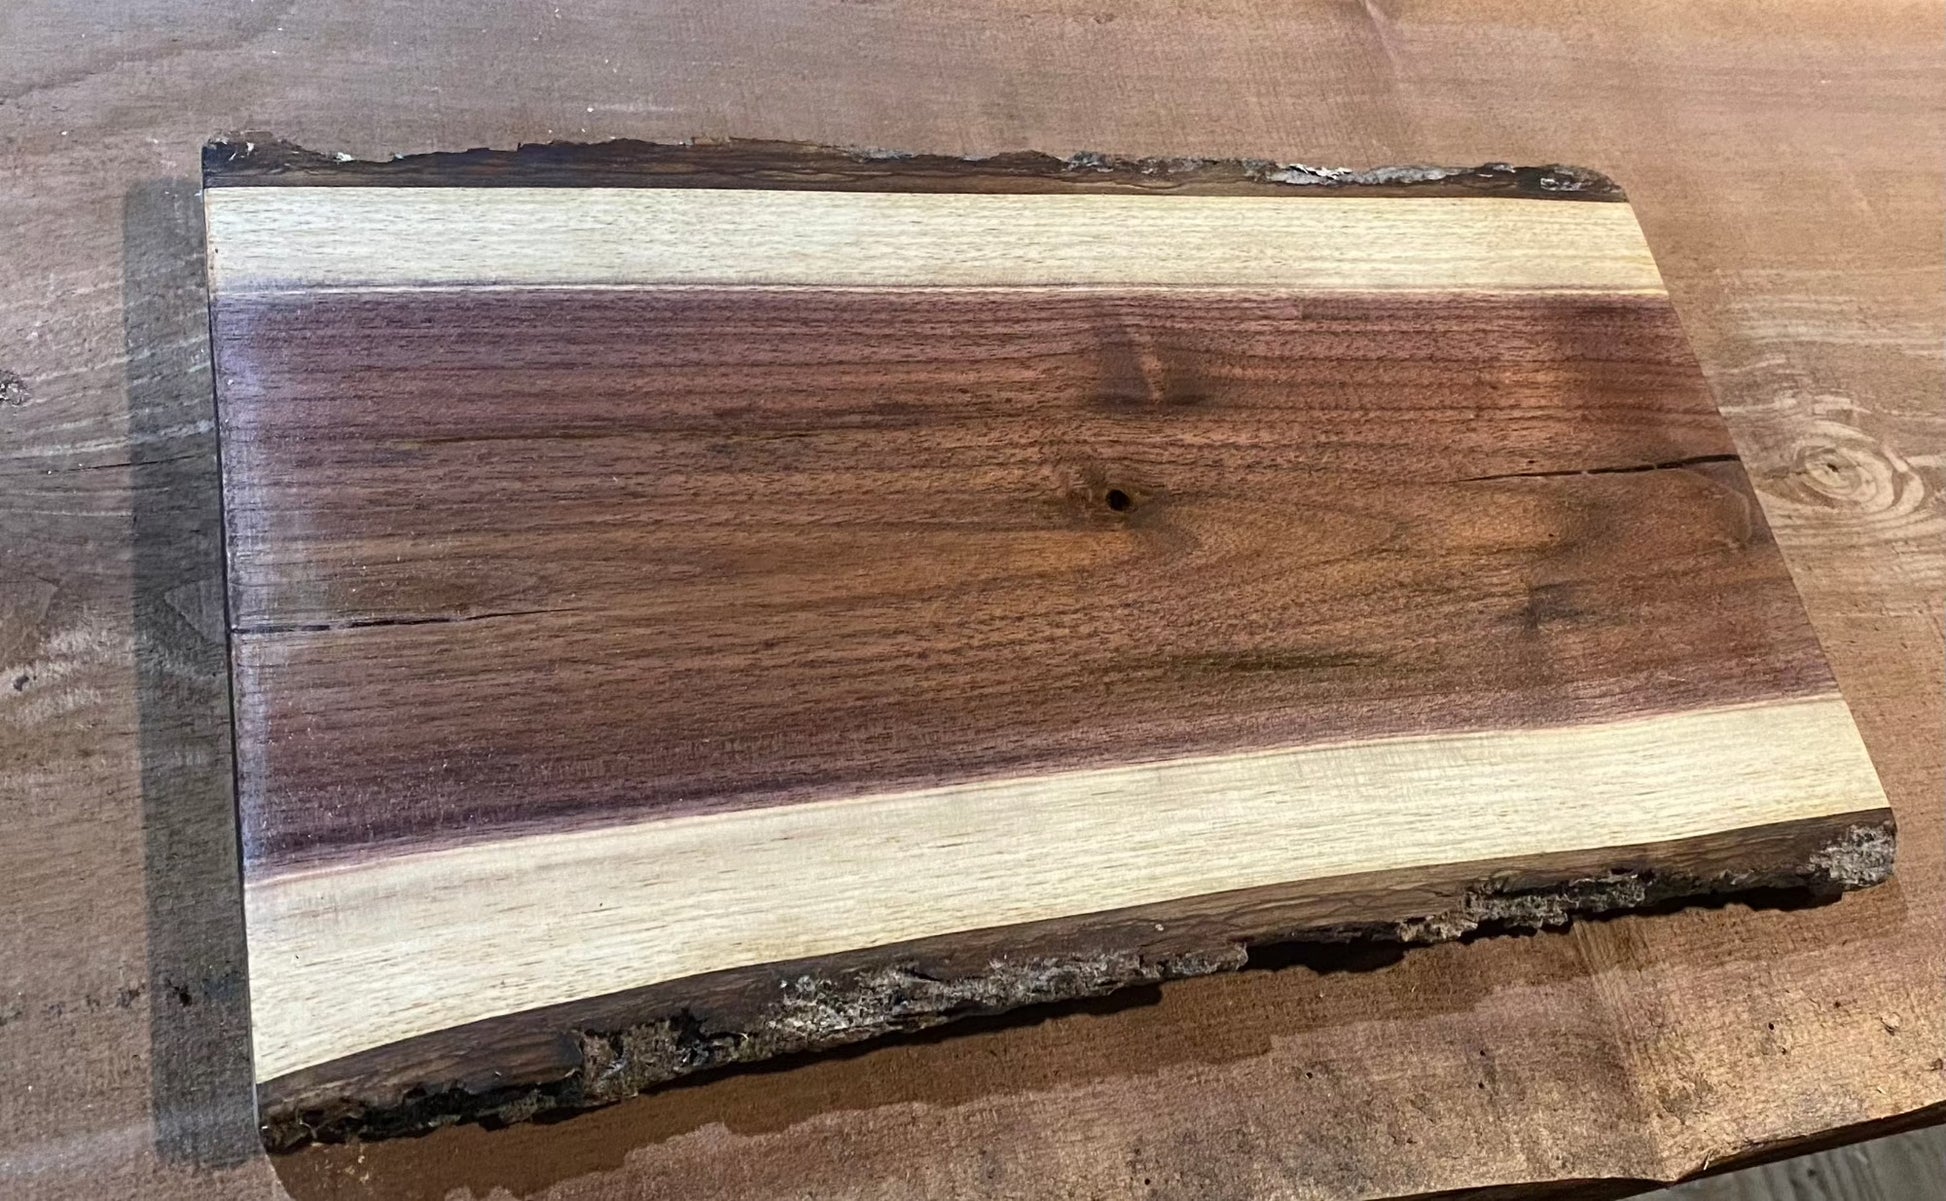 Our live edge black walnut cutting board is 12x8 inches, food safe and finished with beeswax and mineral oil.